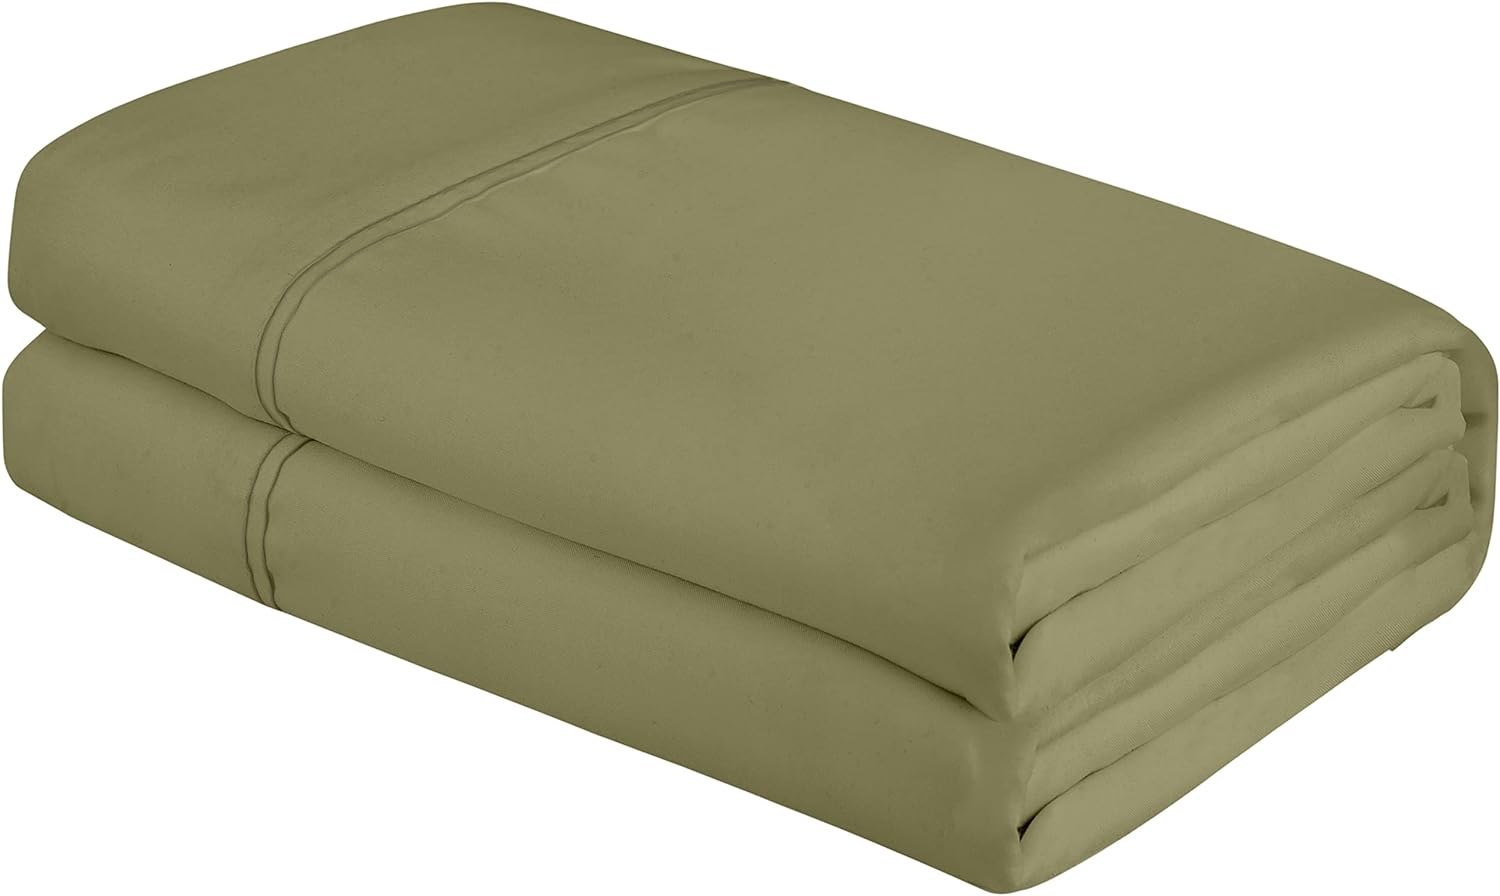 Royale Linens Twin Size Flat Sheet Only - Brushed 1800 Microfiber - Ultra Soft & Breathable - Wrinkle & Stain Resistant - Hotel Quality Flat Sheet Sold Separately - Top Sheet for Bed (Twin SageGreen)